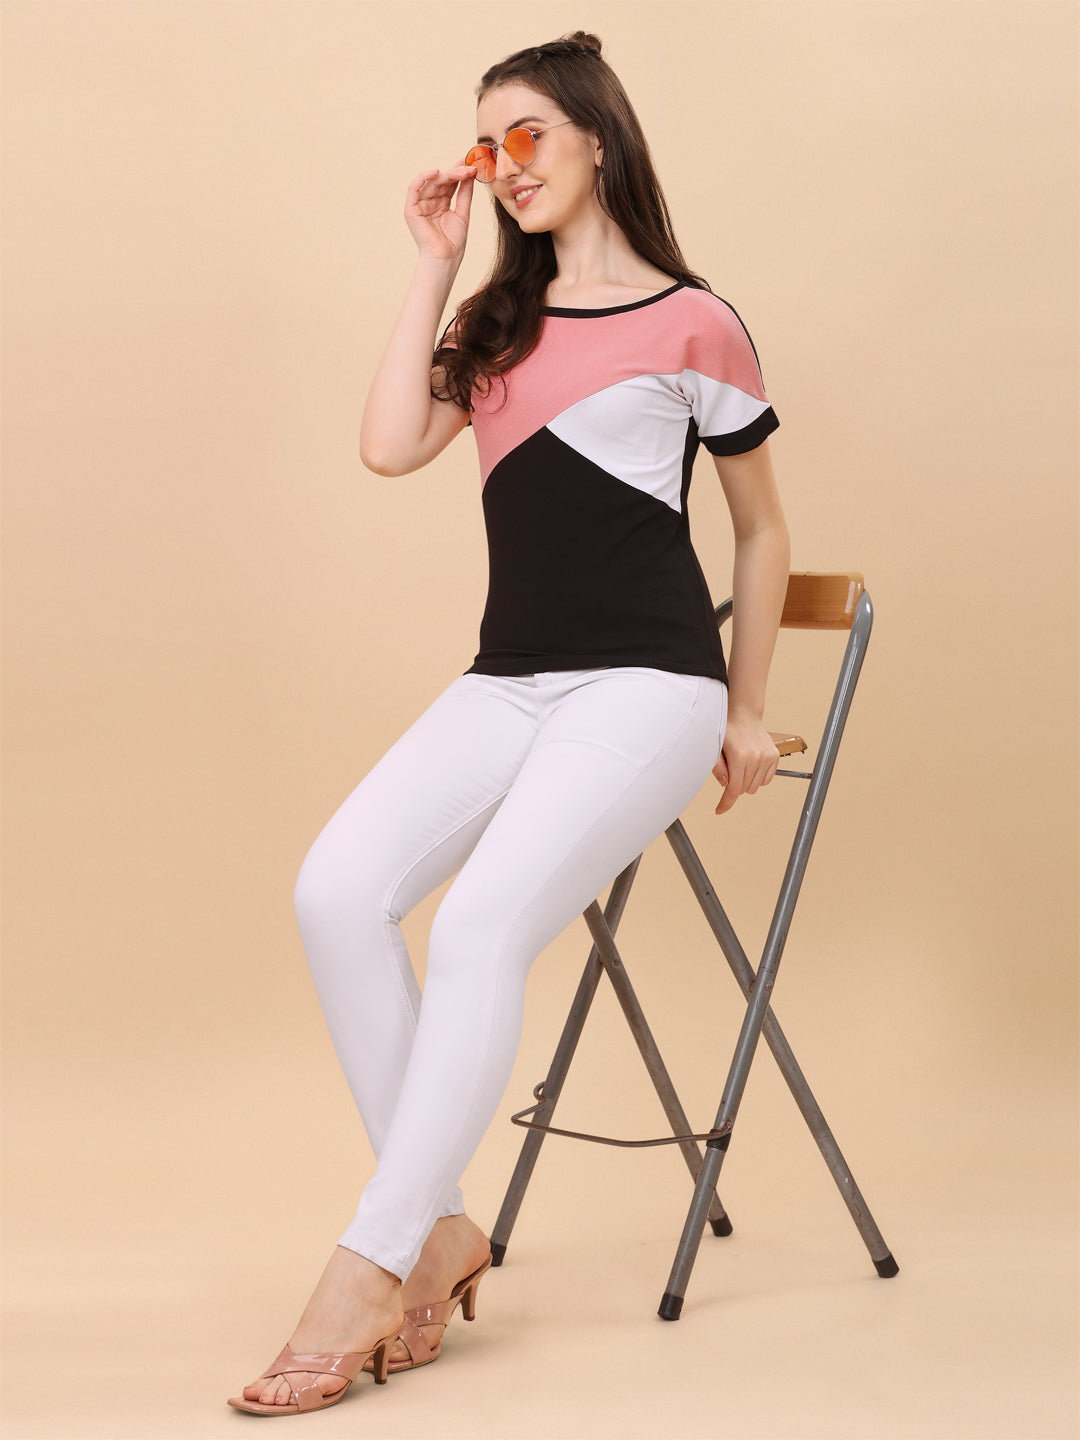 Round Neck Black And Peach Regular Fit Top